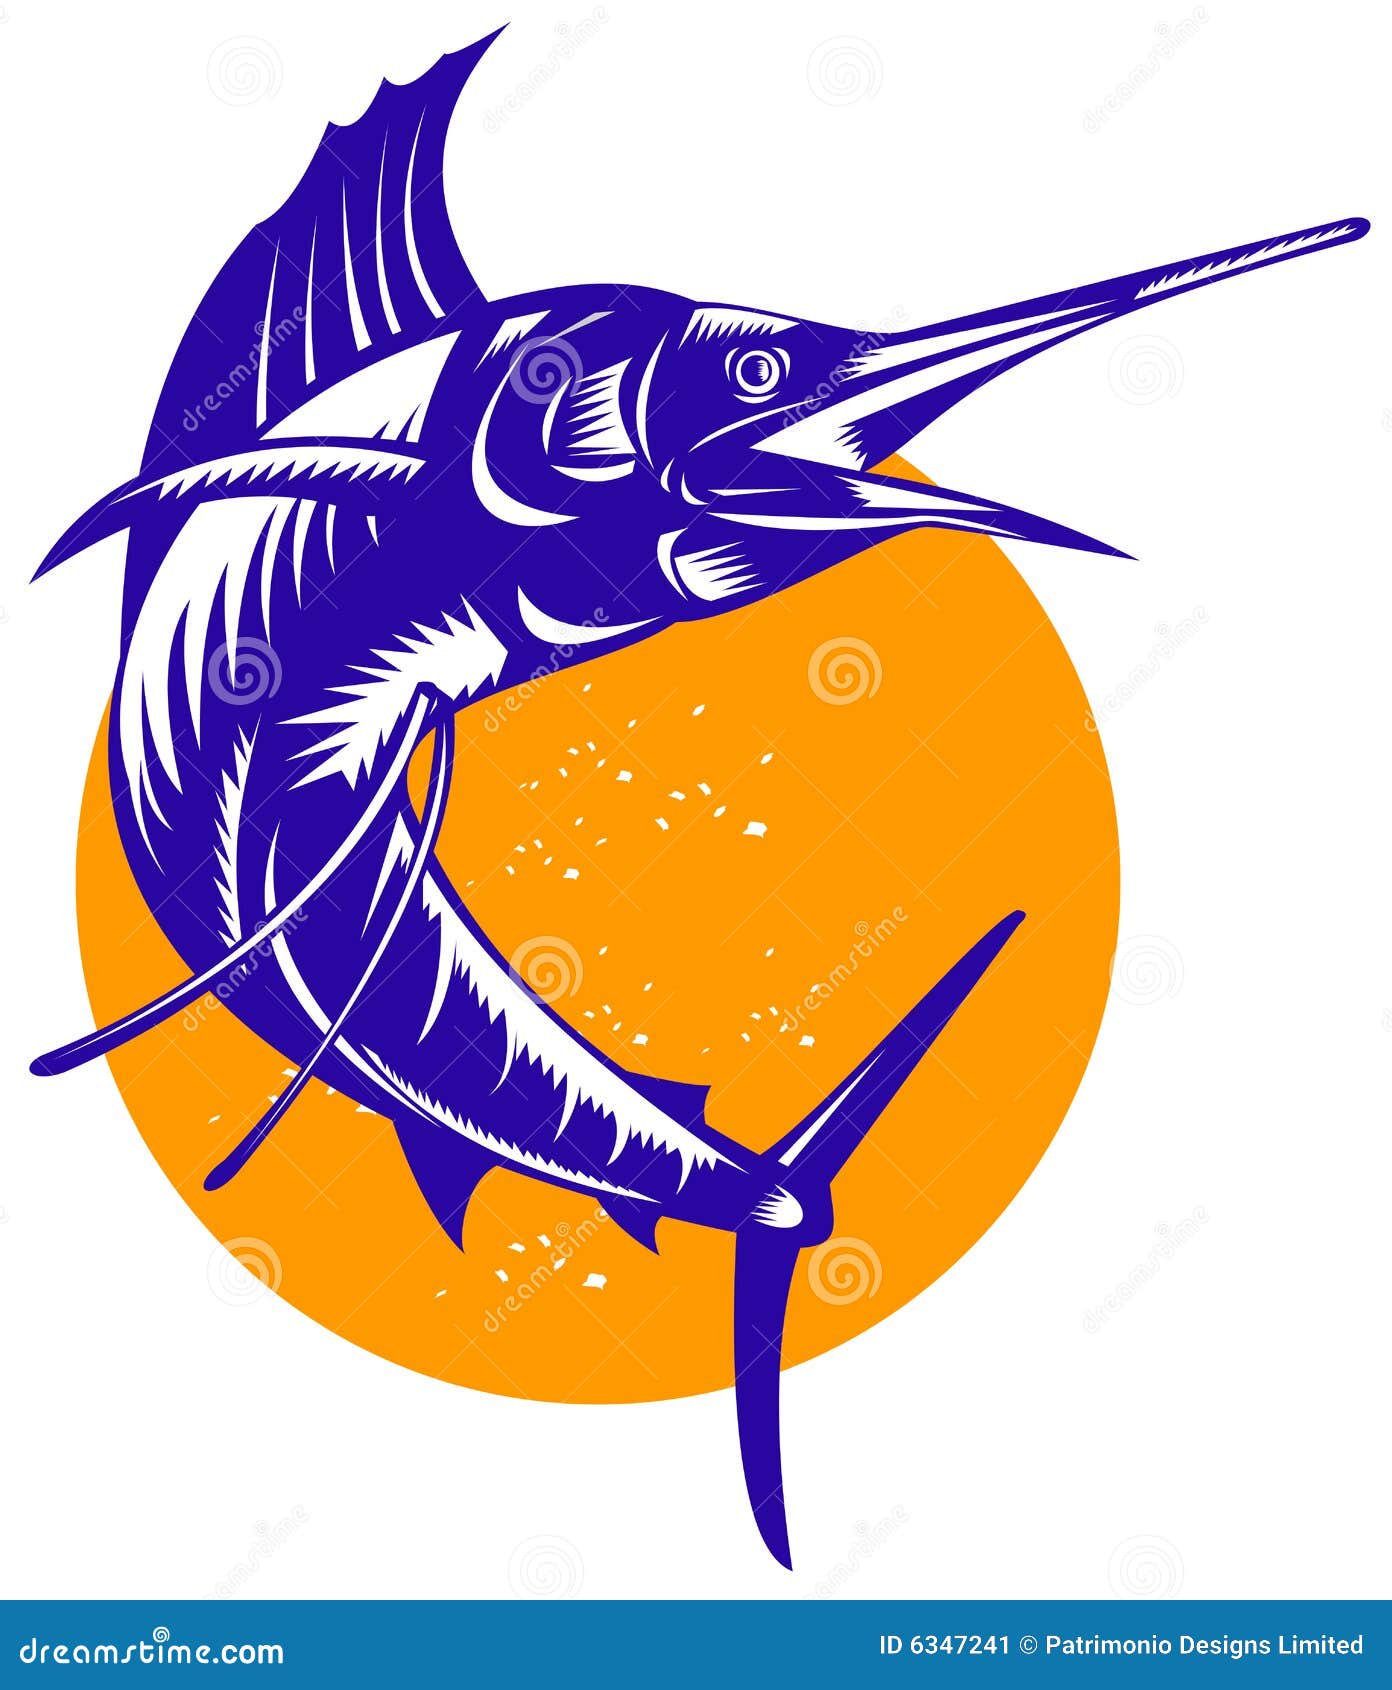 Tuna Marlin: Over 5,389 Royalty-Free Licensable Stock Illustrations &  Drawings | Shutterstock